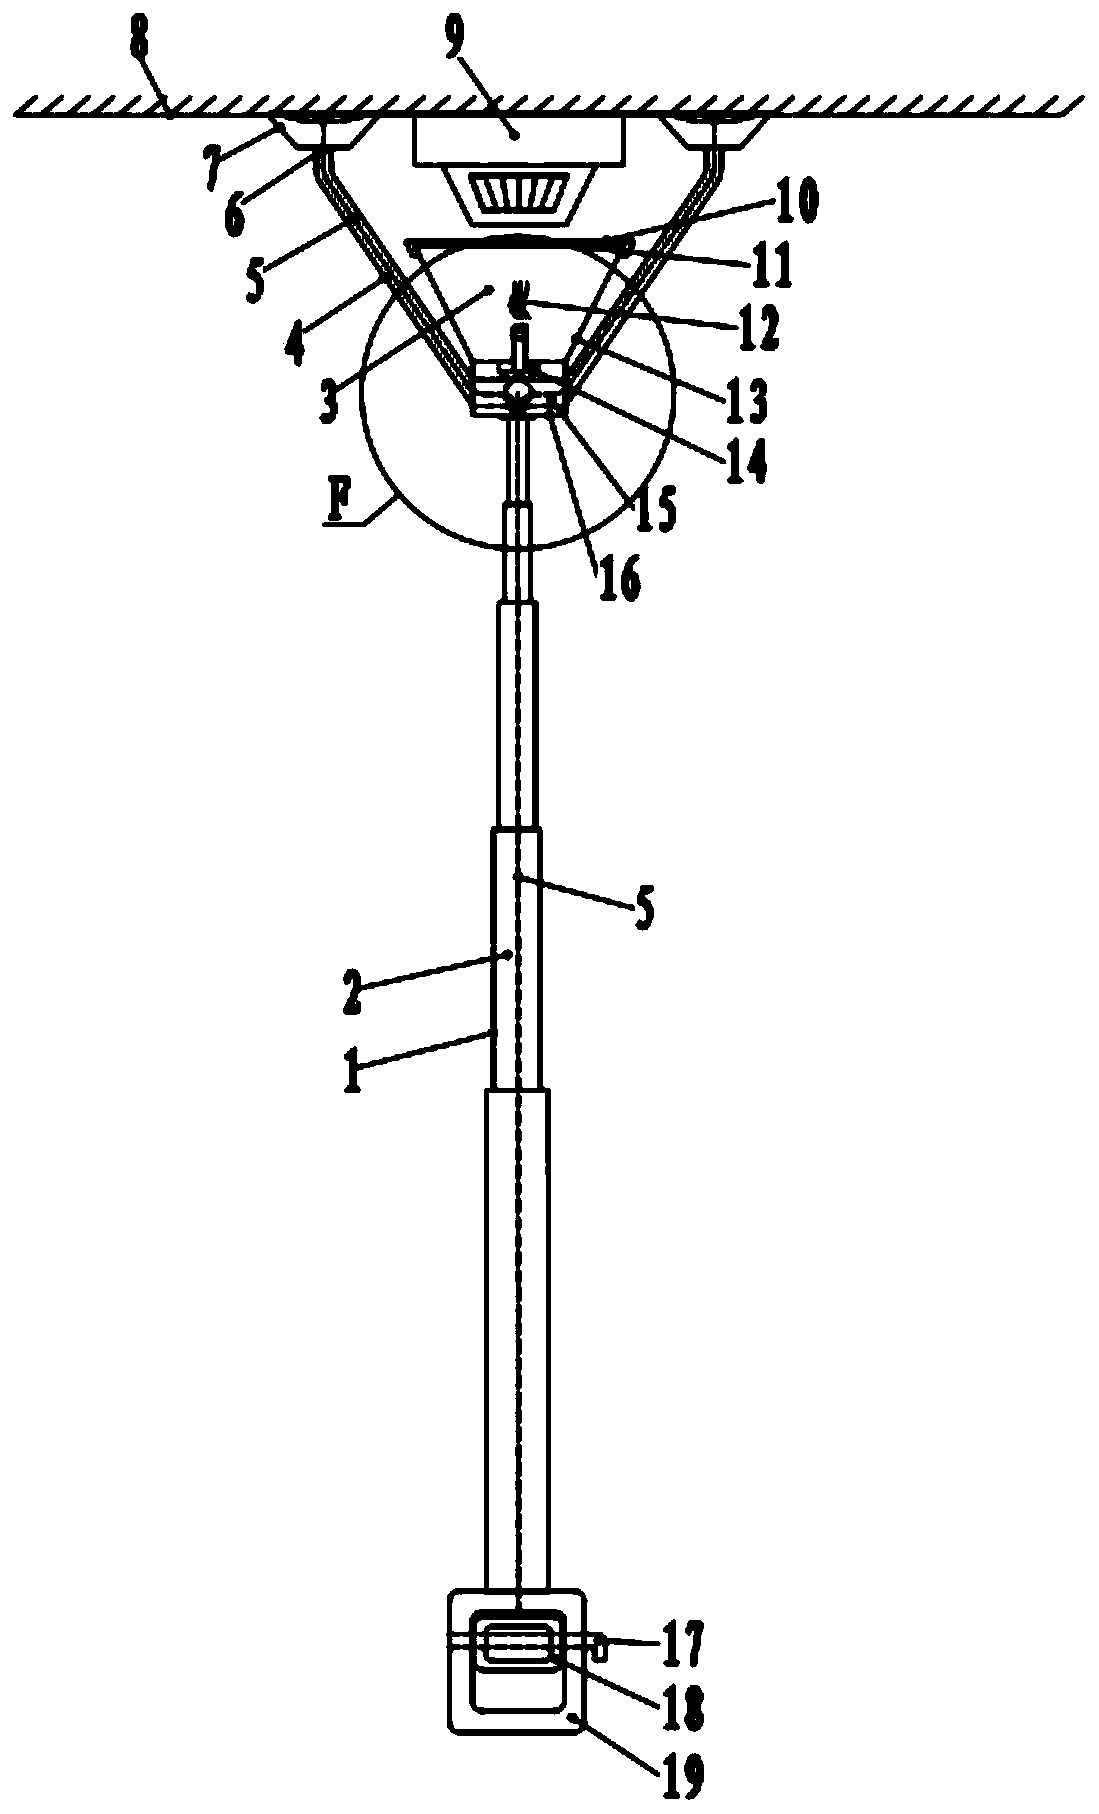 Test device and method for detecting smoke alarm